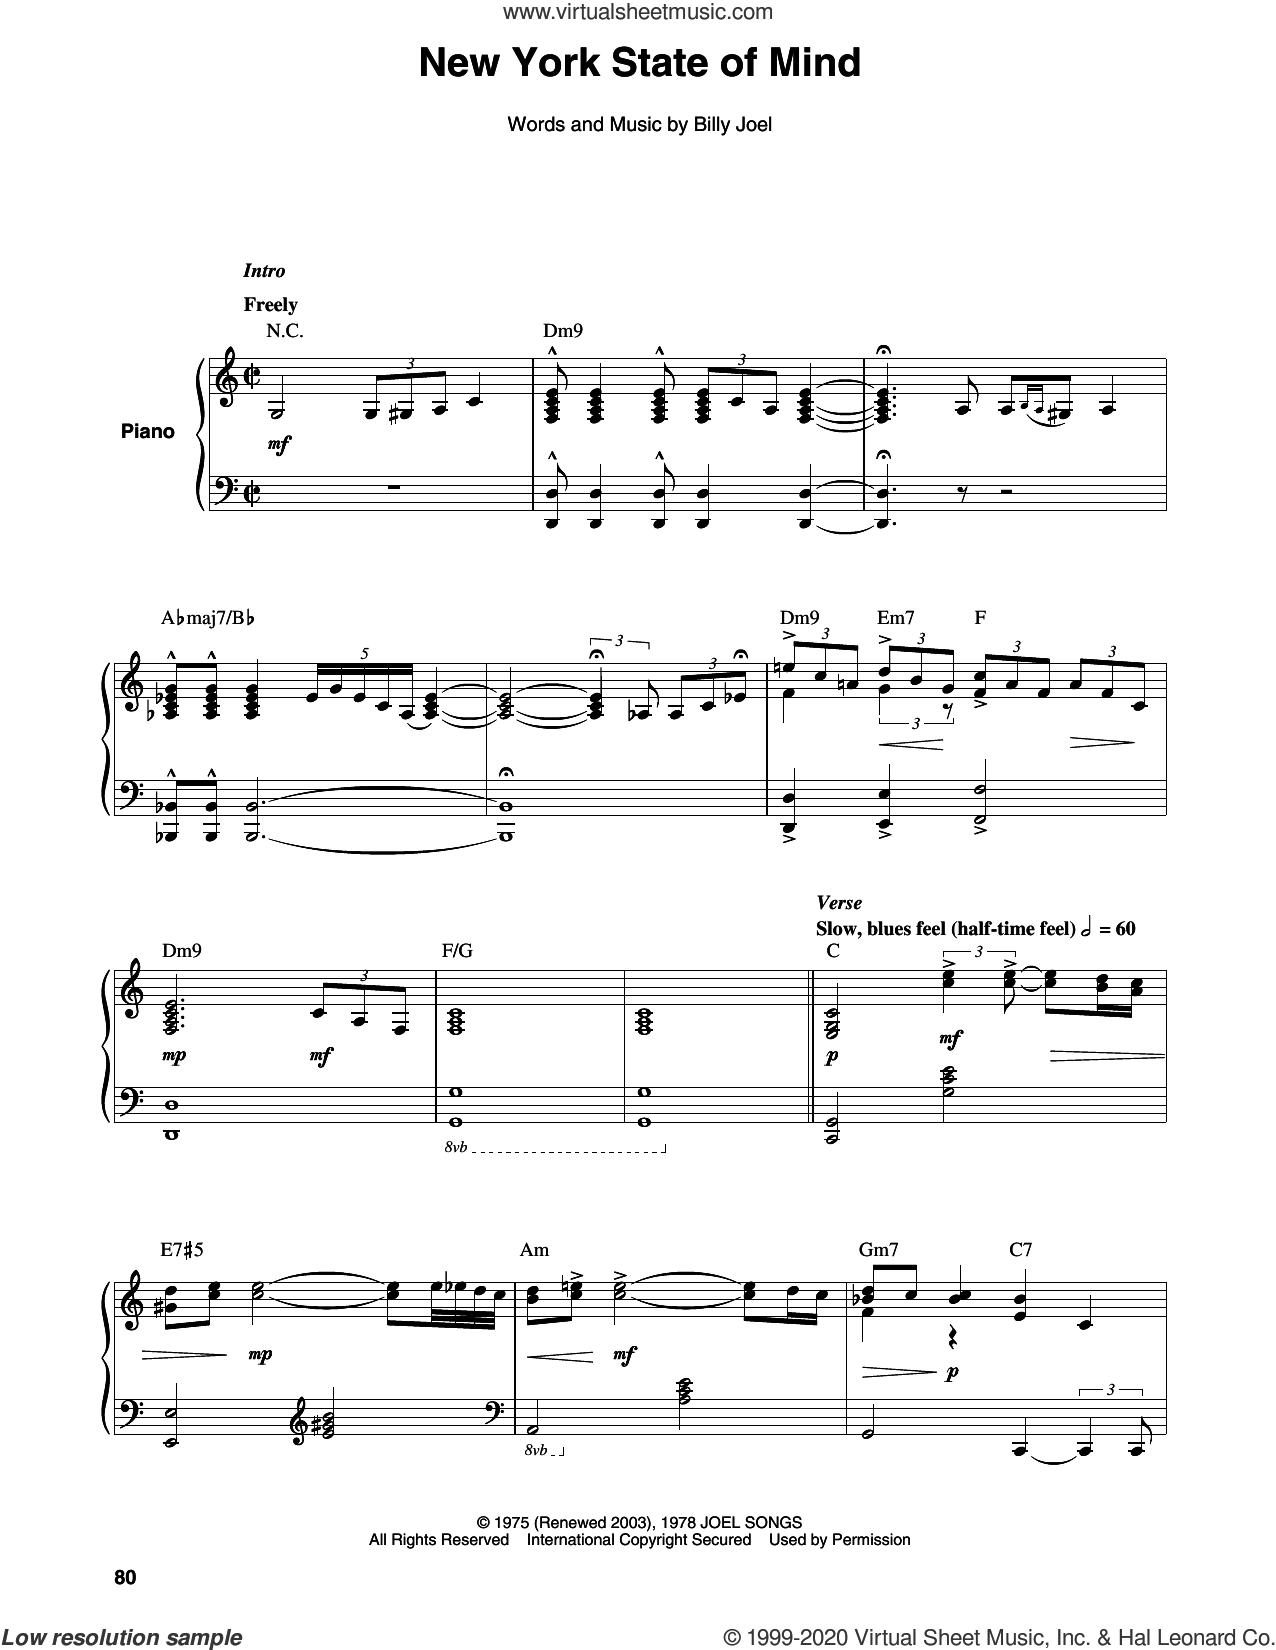 New York State of Mind – Billy Joel Sheet music for Piano, Vocals, Strings  group (Mixed Trio)